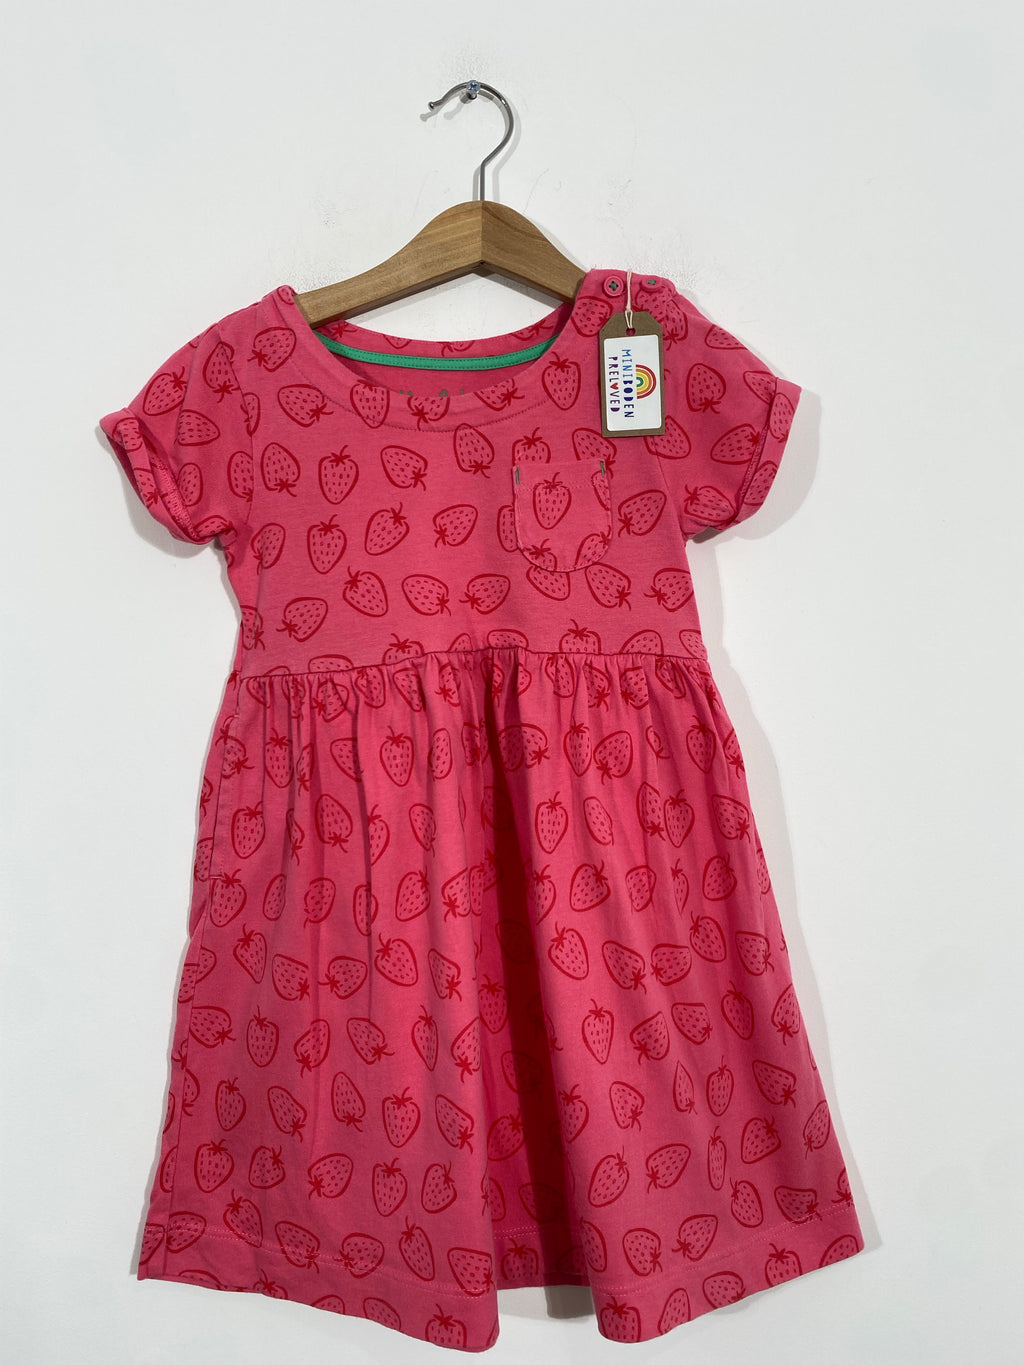 Adorable Strawberry Print Dress (3-4 Years)